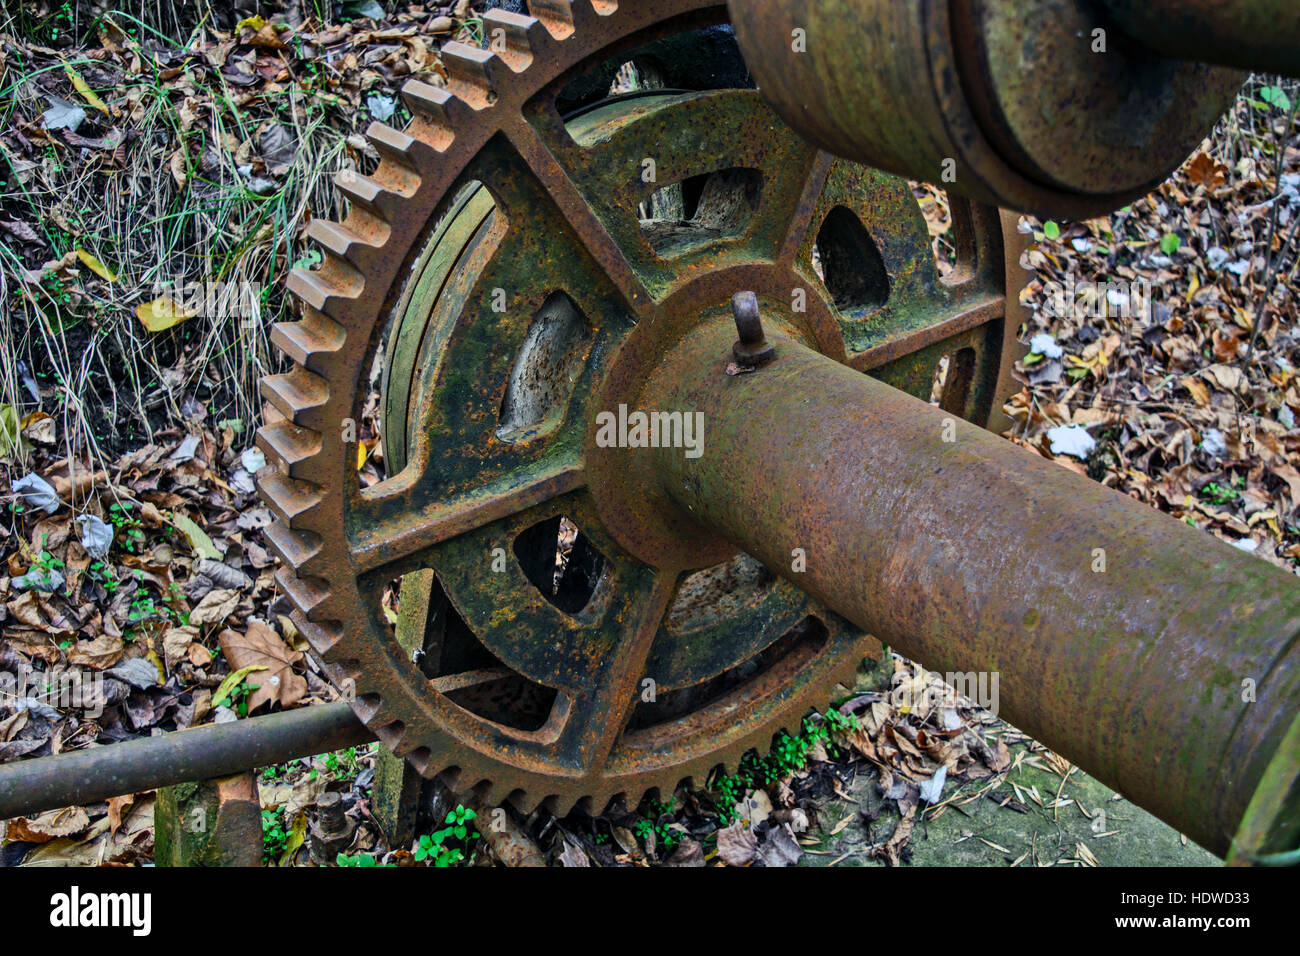 The old mechanism for pulling boats out of the river. Stock Photo